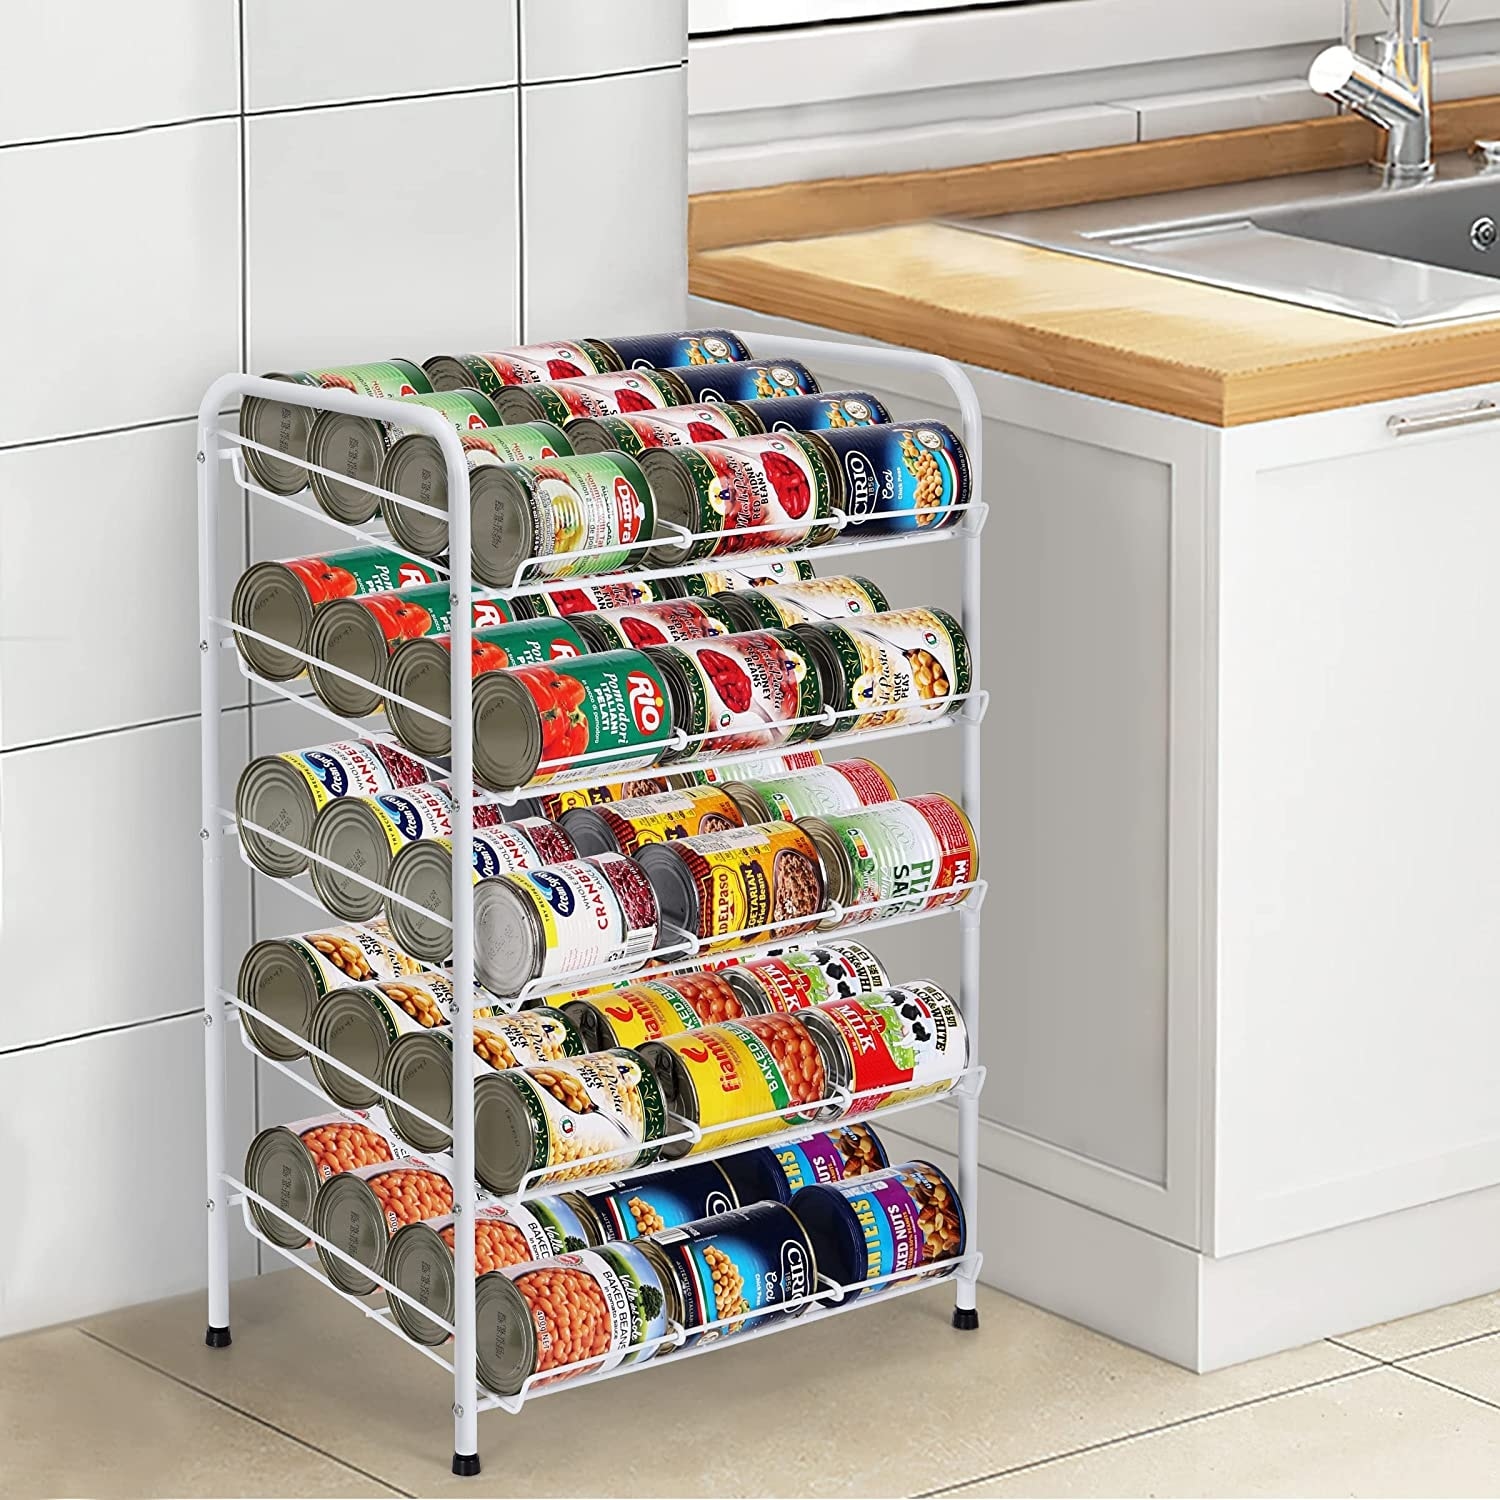 https://ak1.ostkcdn.com/images/products/is/images/direct/4112622d78d8fd60ff9ee162b01770717c7bce80/Can-Organizer-Can-Good-Organizer-for-Pantry.jpg